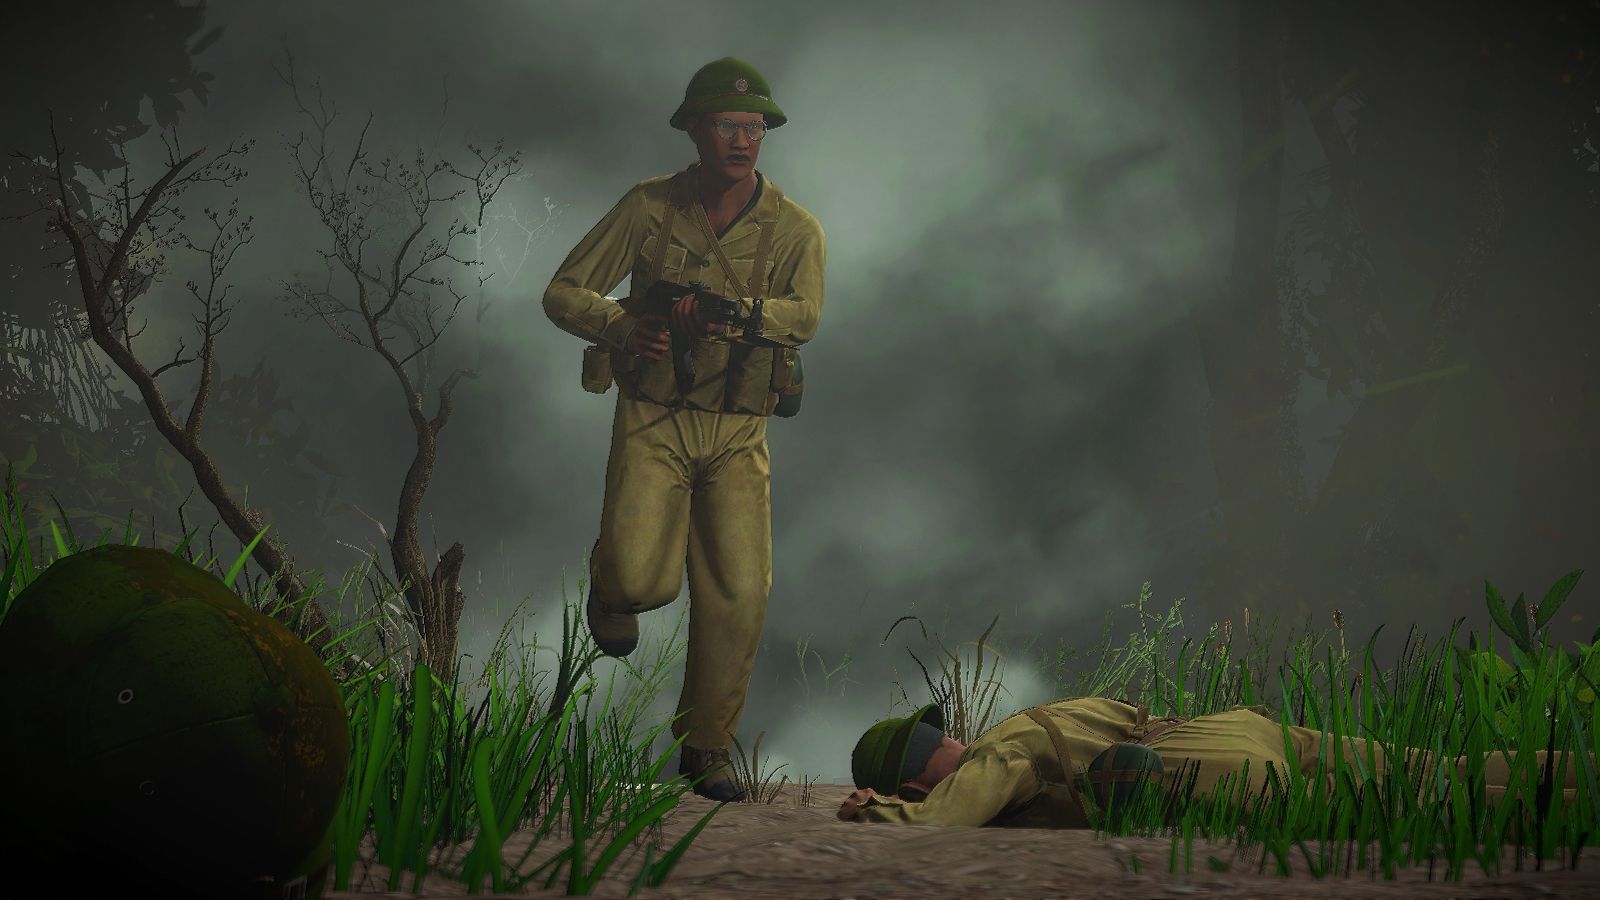 Made We Were Soldiers Scene with Rising Storm 2: Vietnam Assets